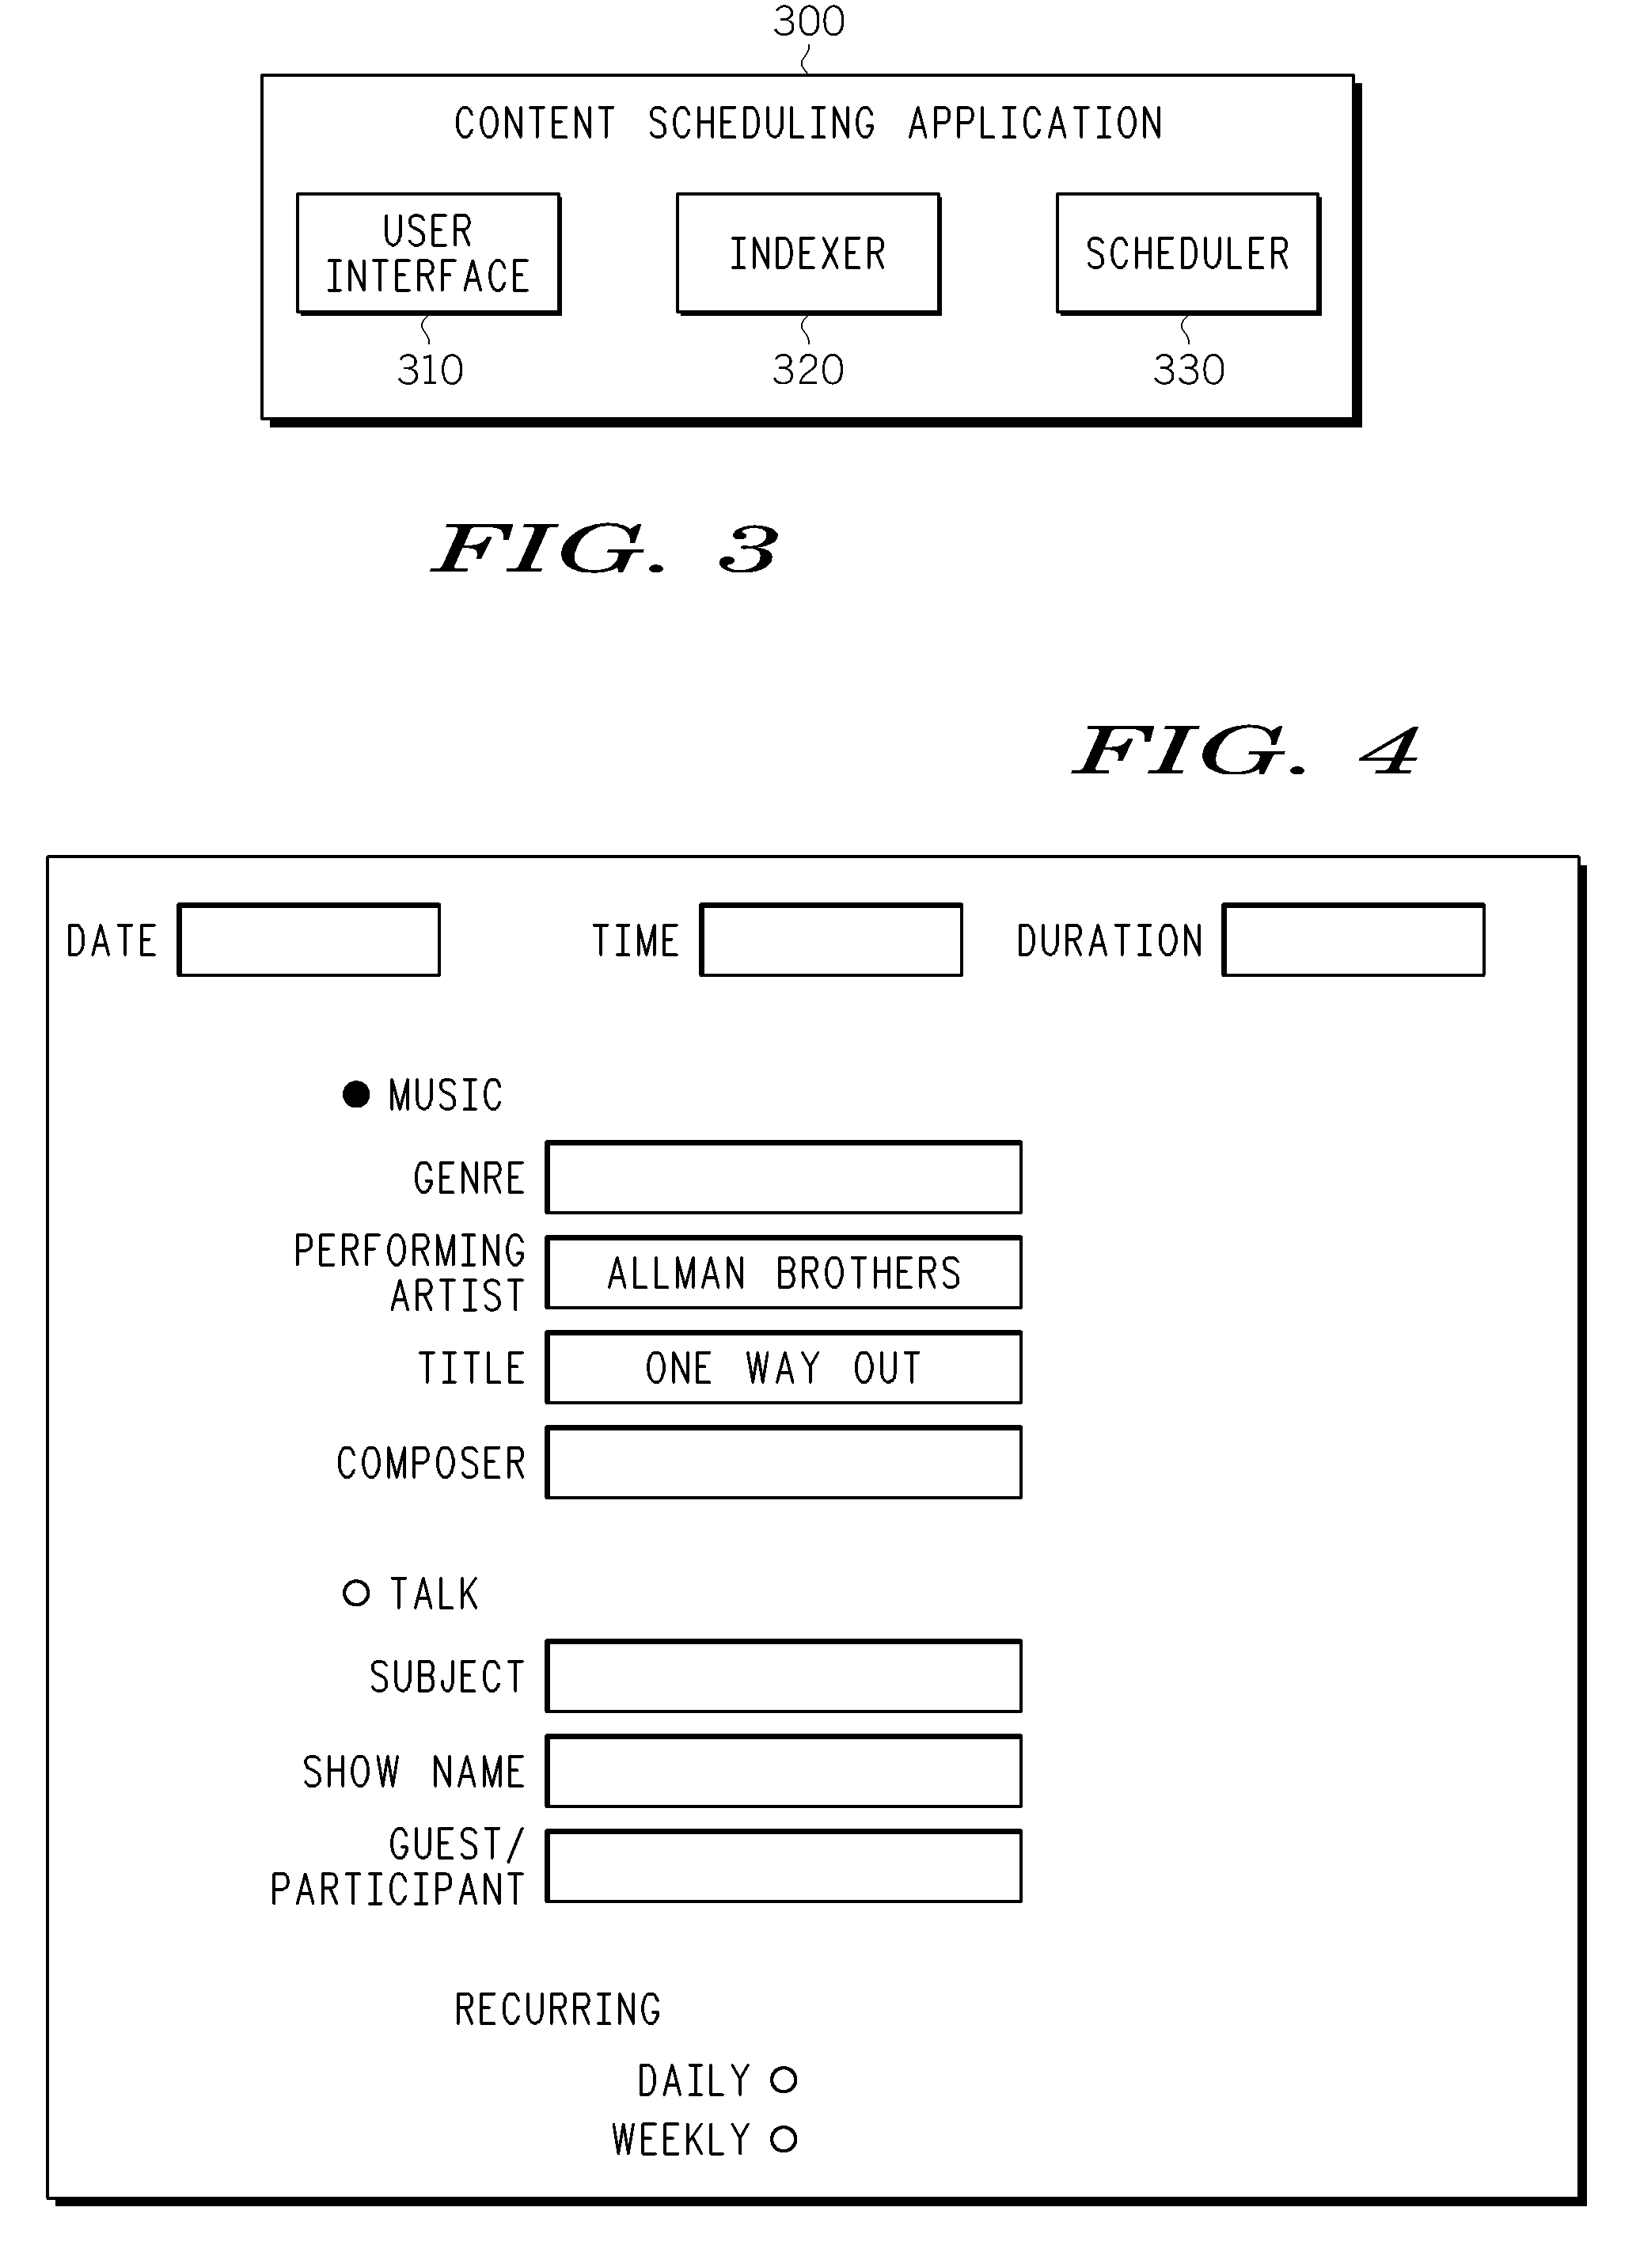 Method and apparatus for identifying and scheduling internet radio programming